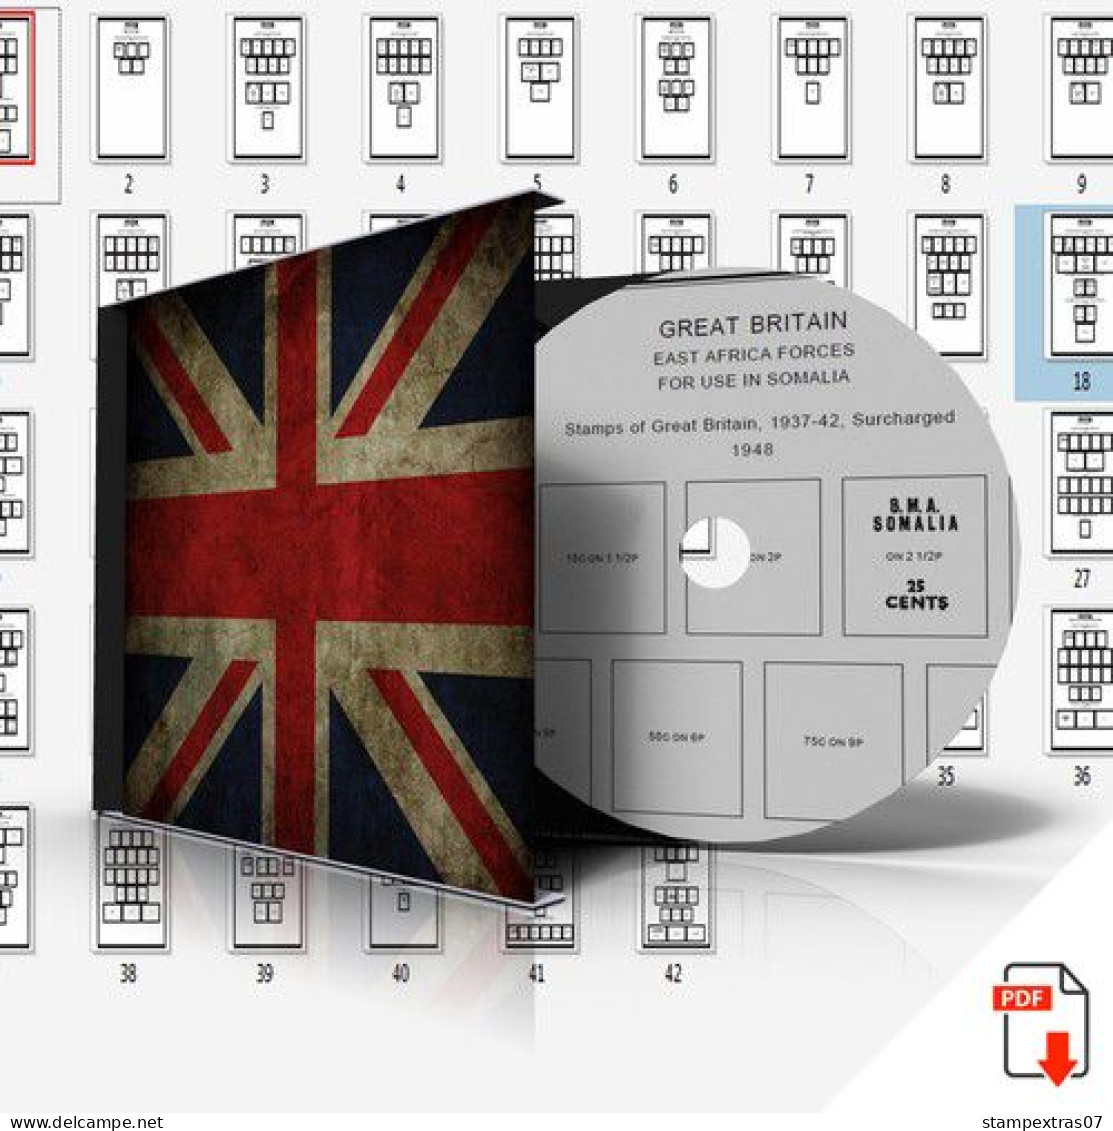 GREAT BRITAIN ADDITIONS STAMP ALBUM PAGES 1937-2011 (107 Pages) - Englisch